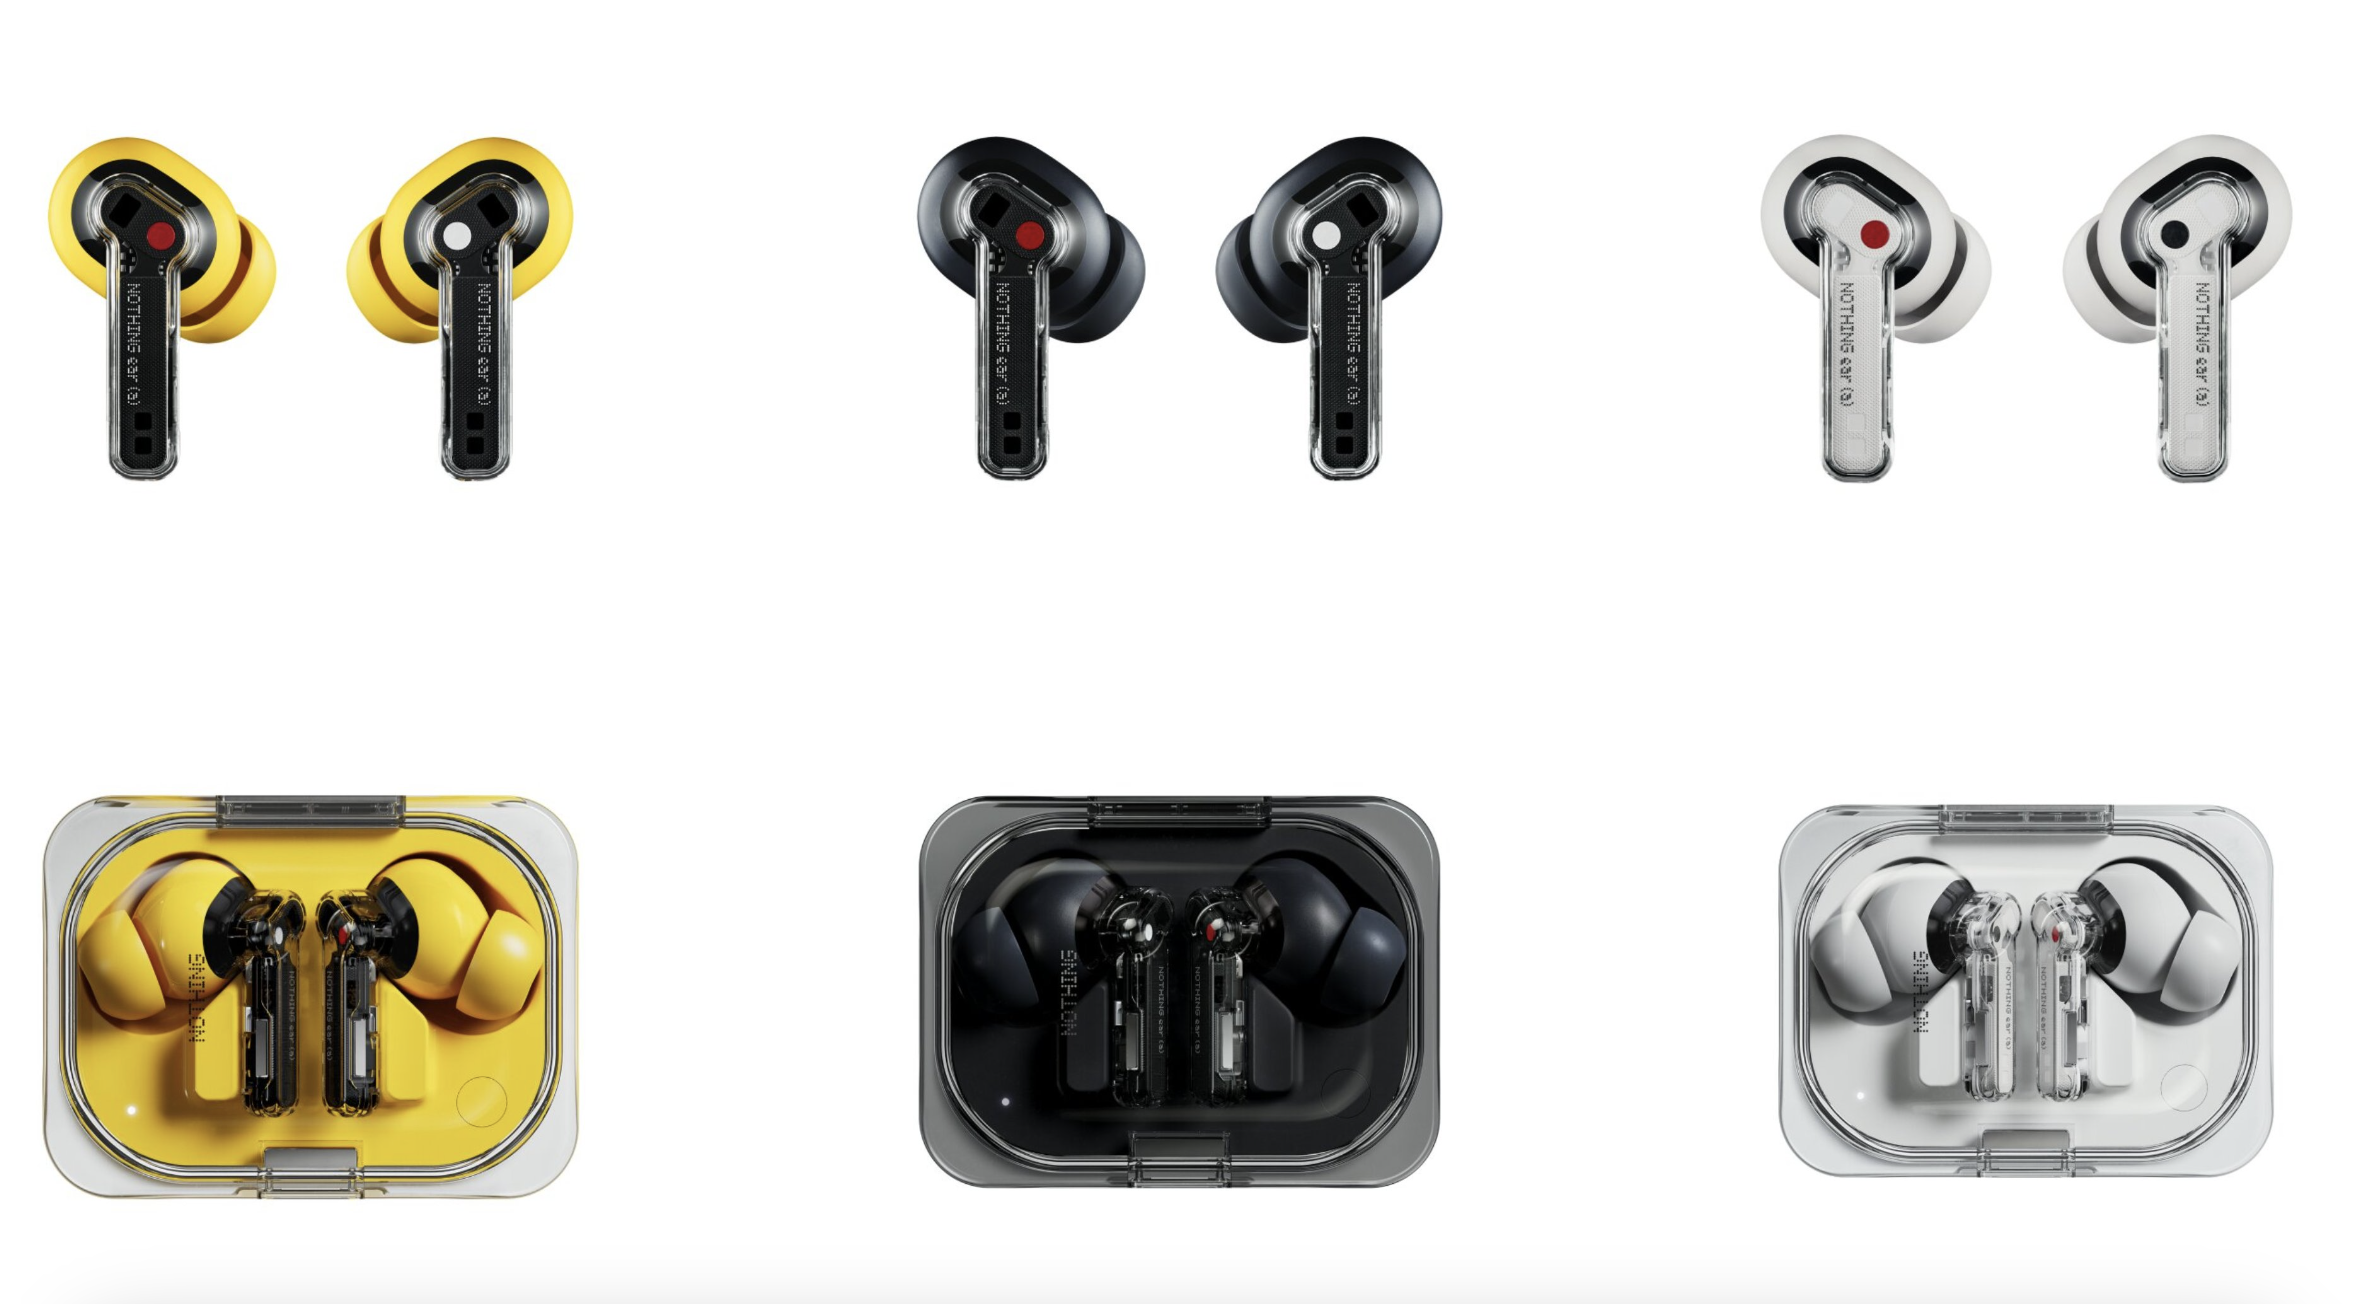 Nothing's Upcoming Earbuds Revealed in Leaks